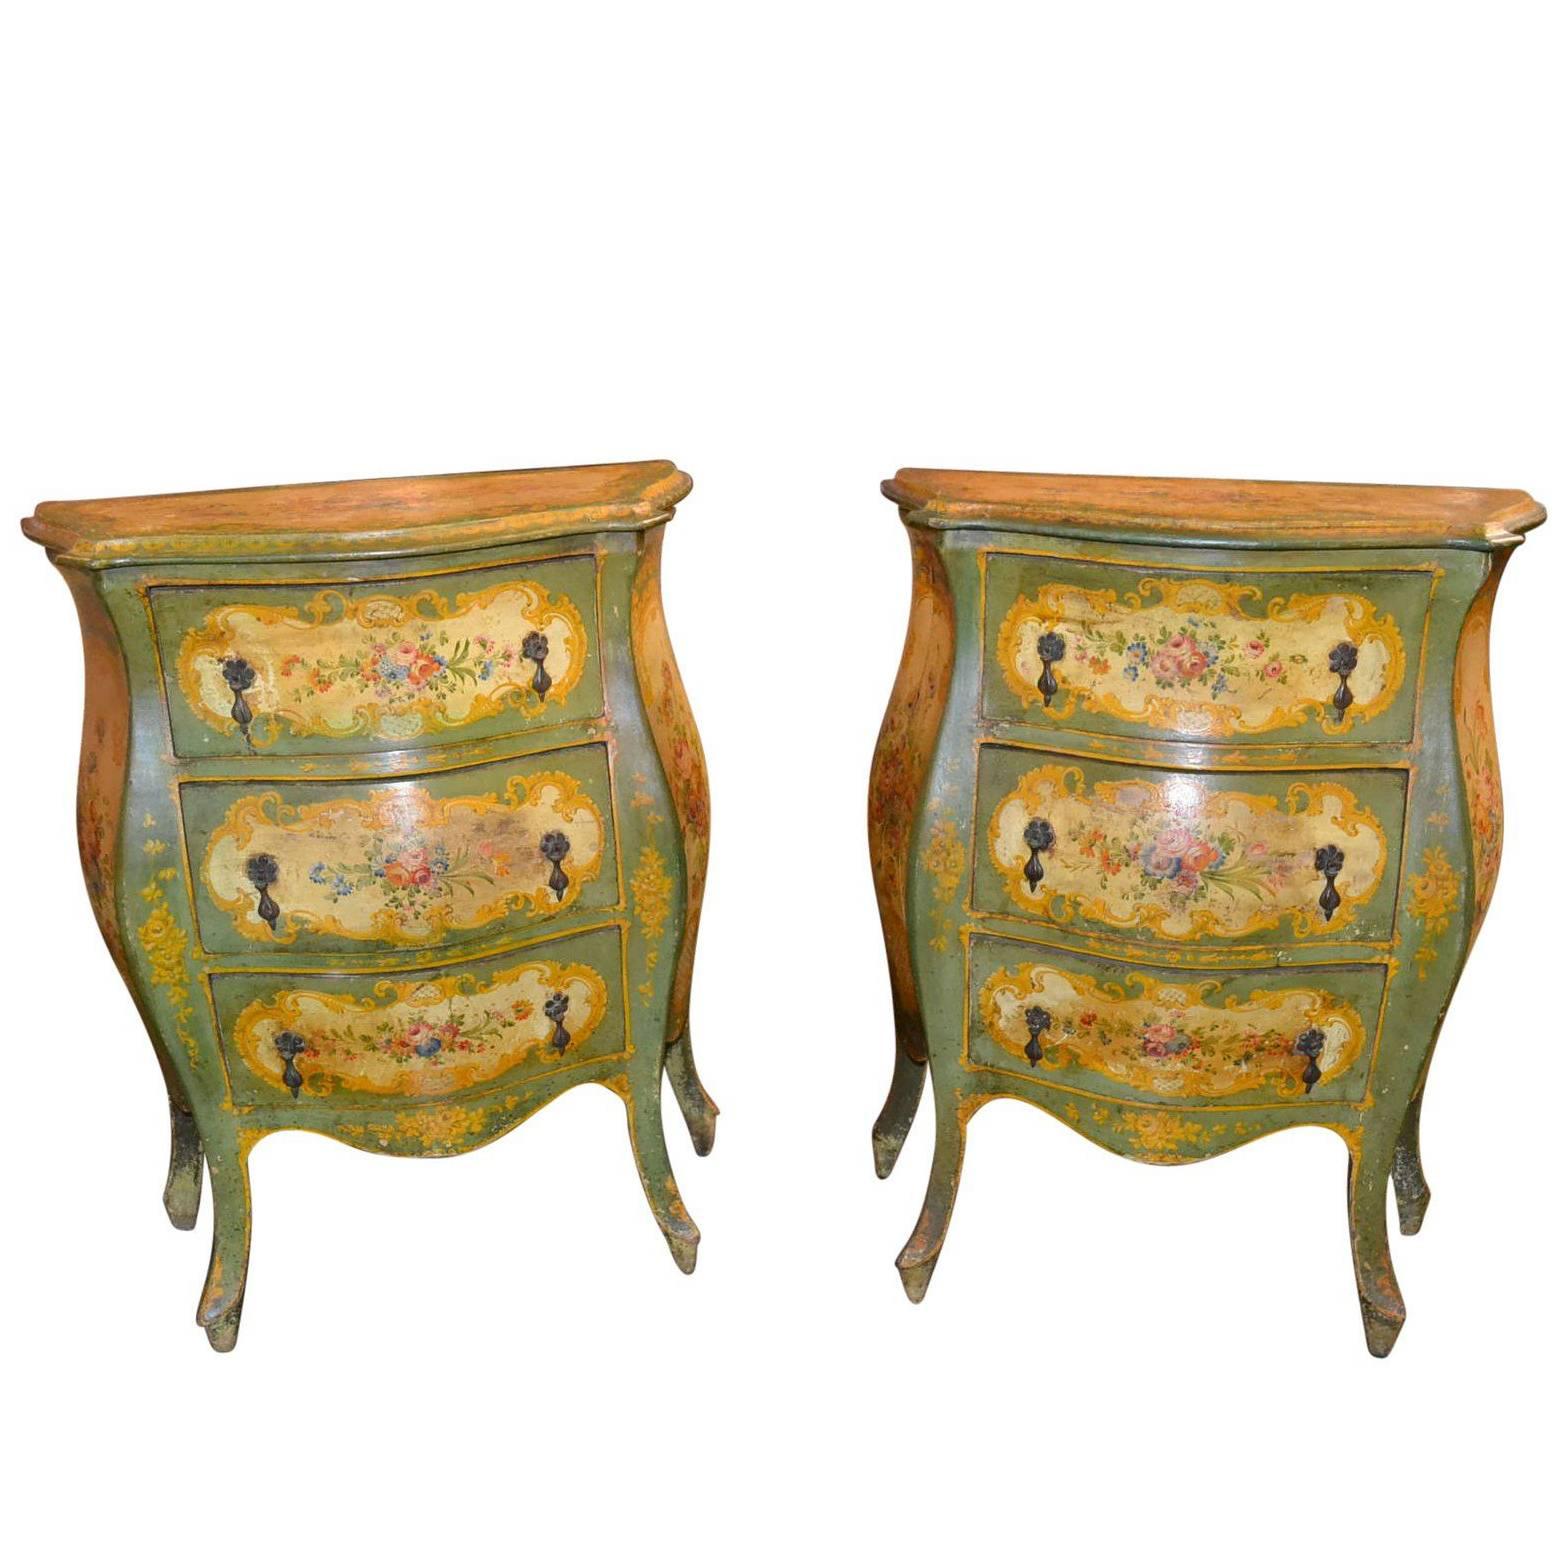 Pair of Antique Italian Painted Chests